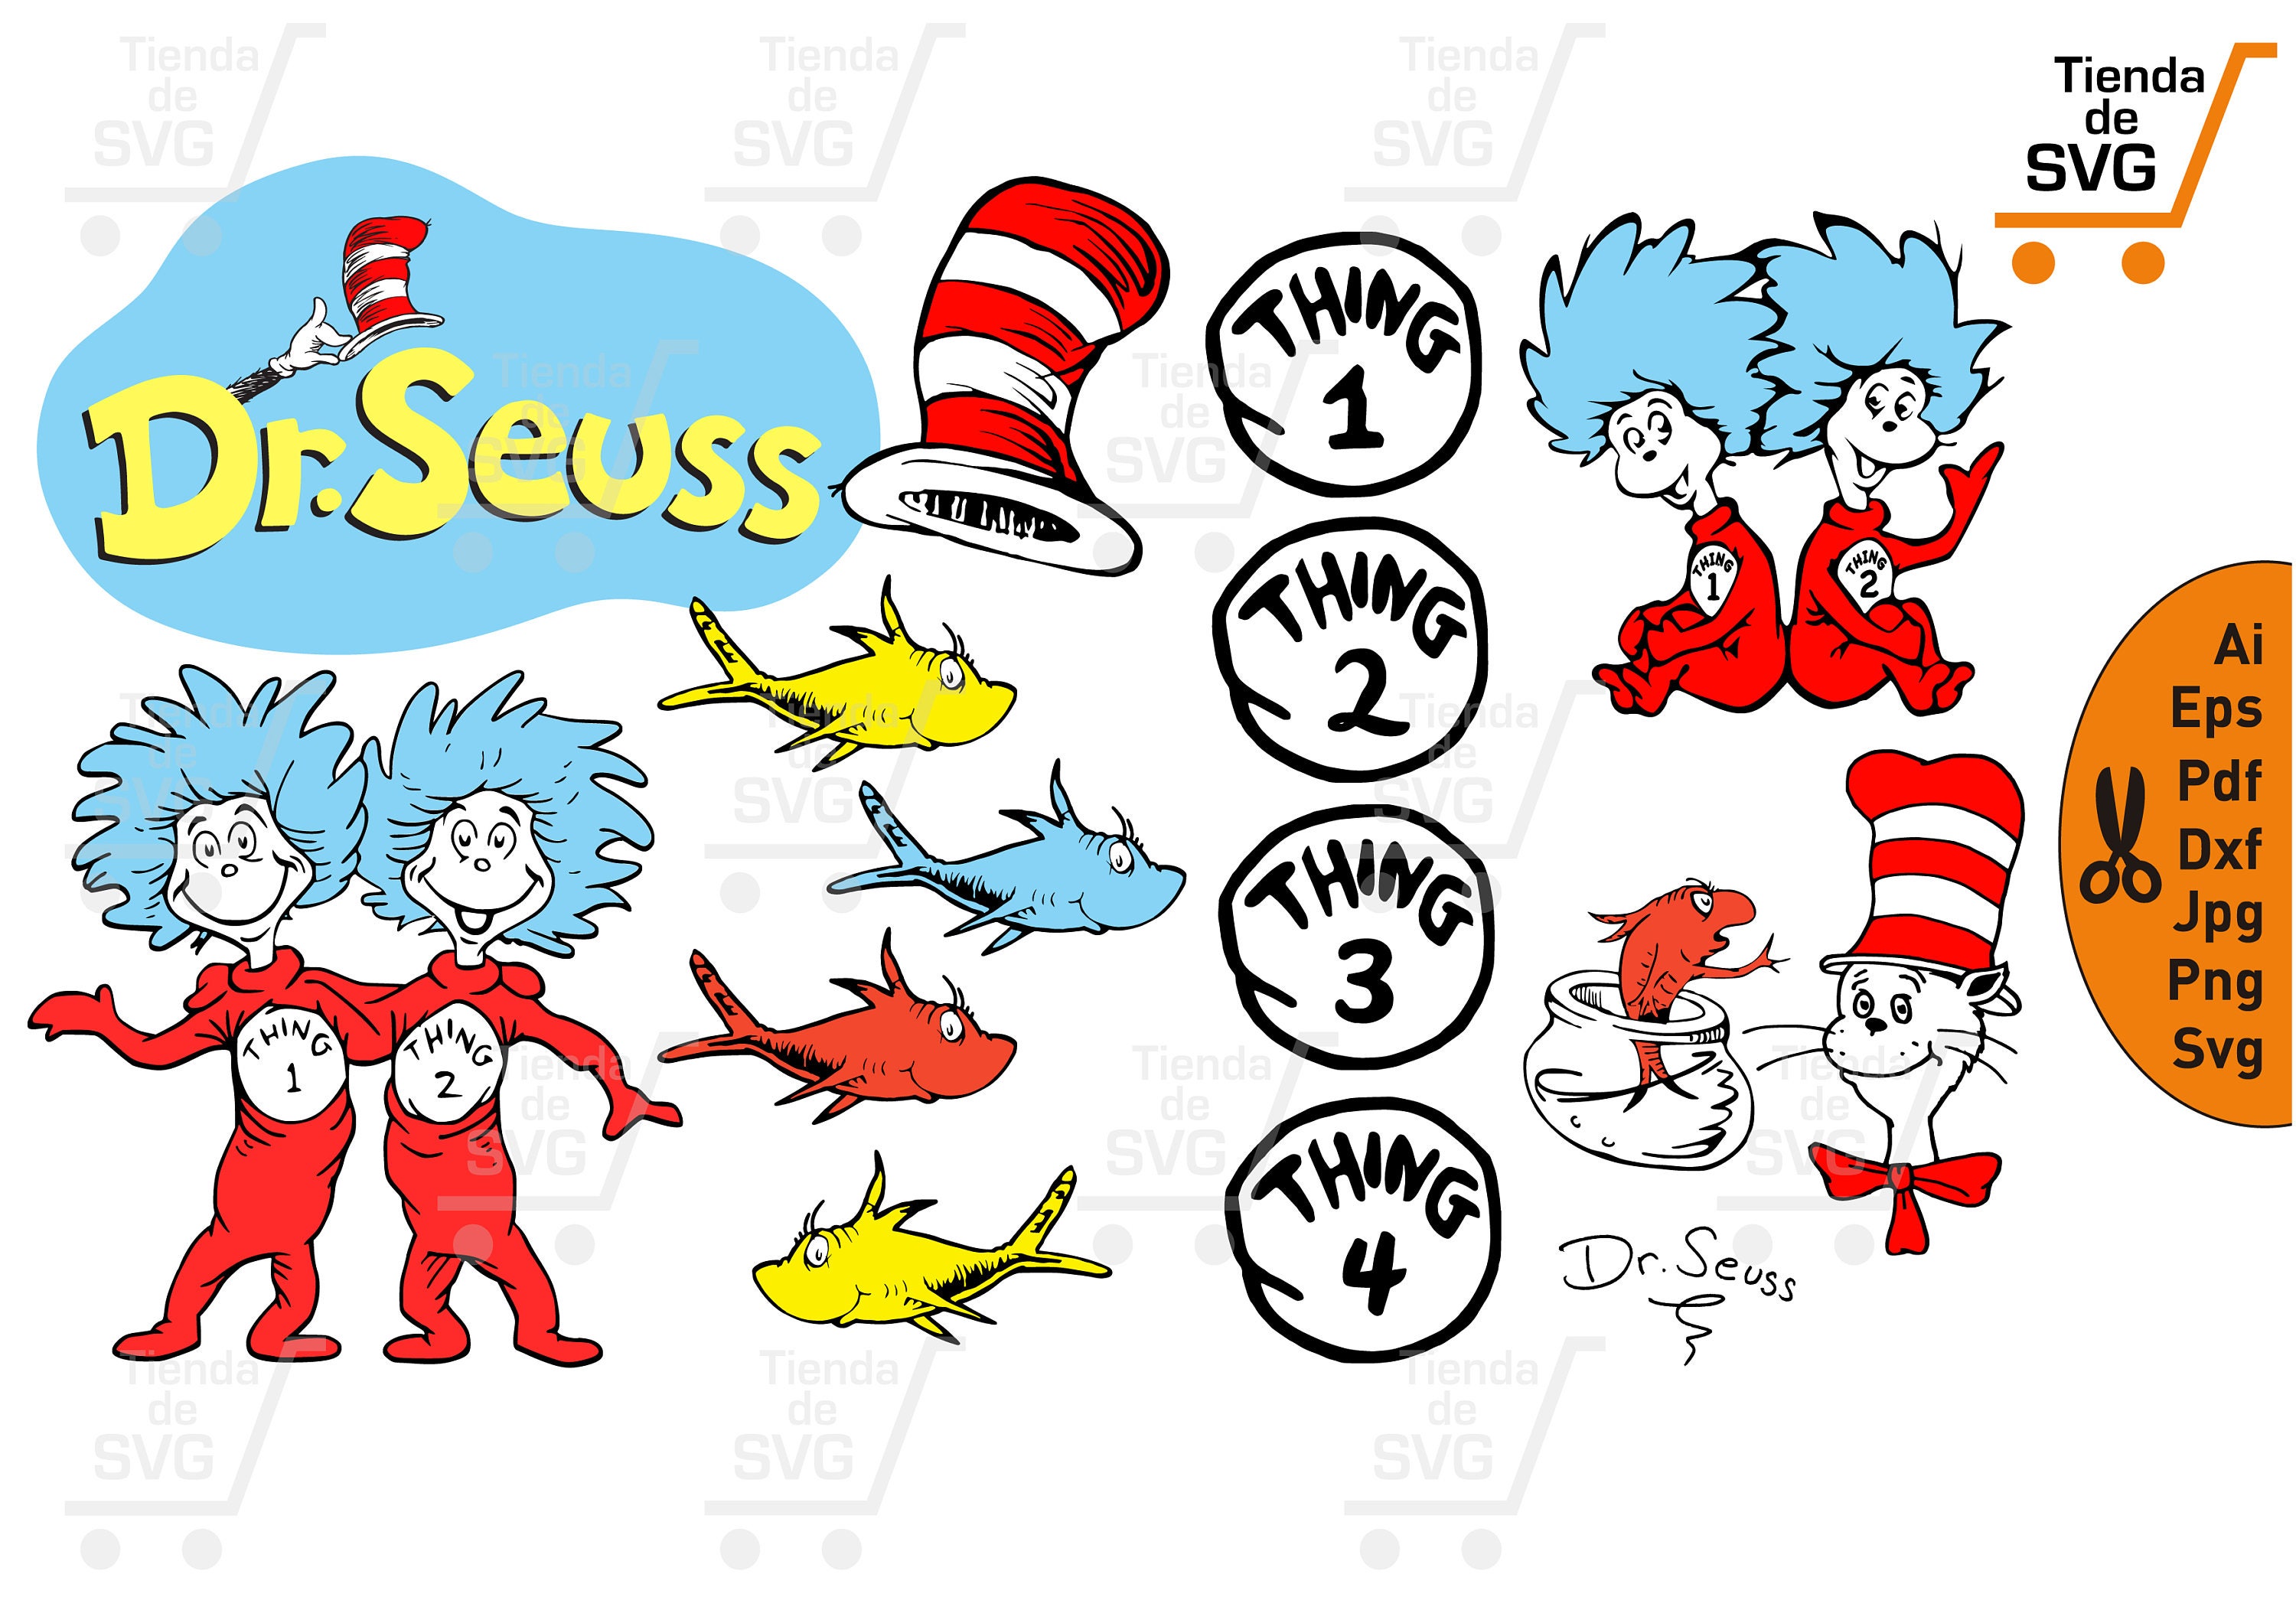 Download The cat in the hat svg dr seuss svg thing 1 and thing 2